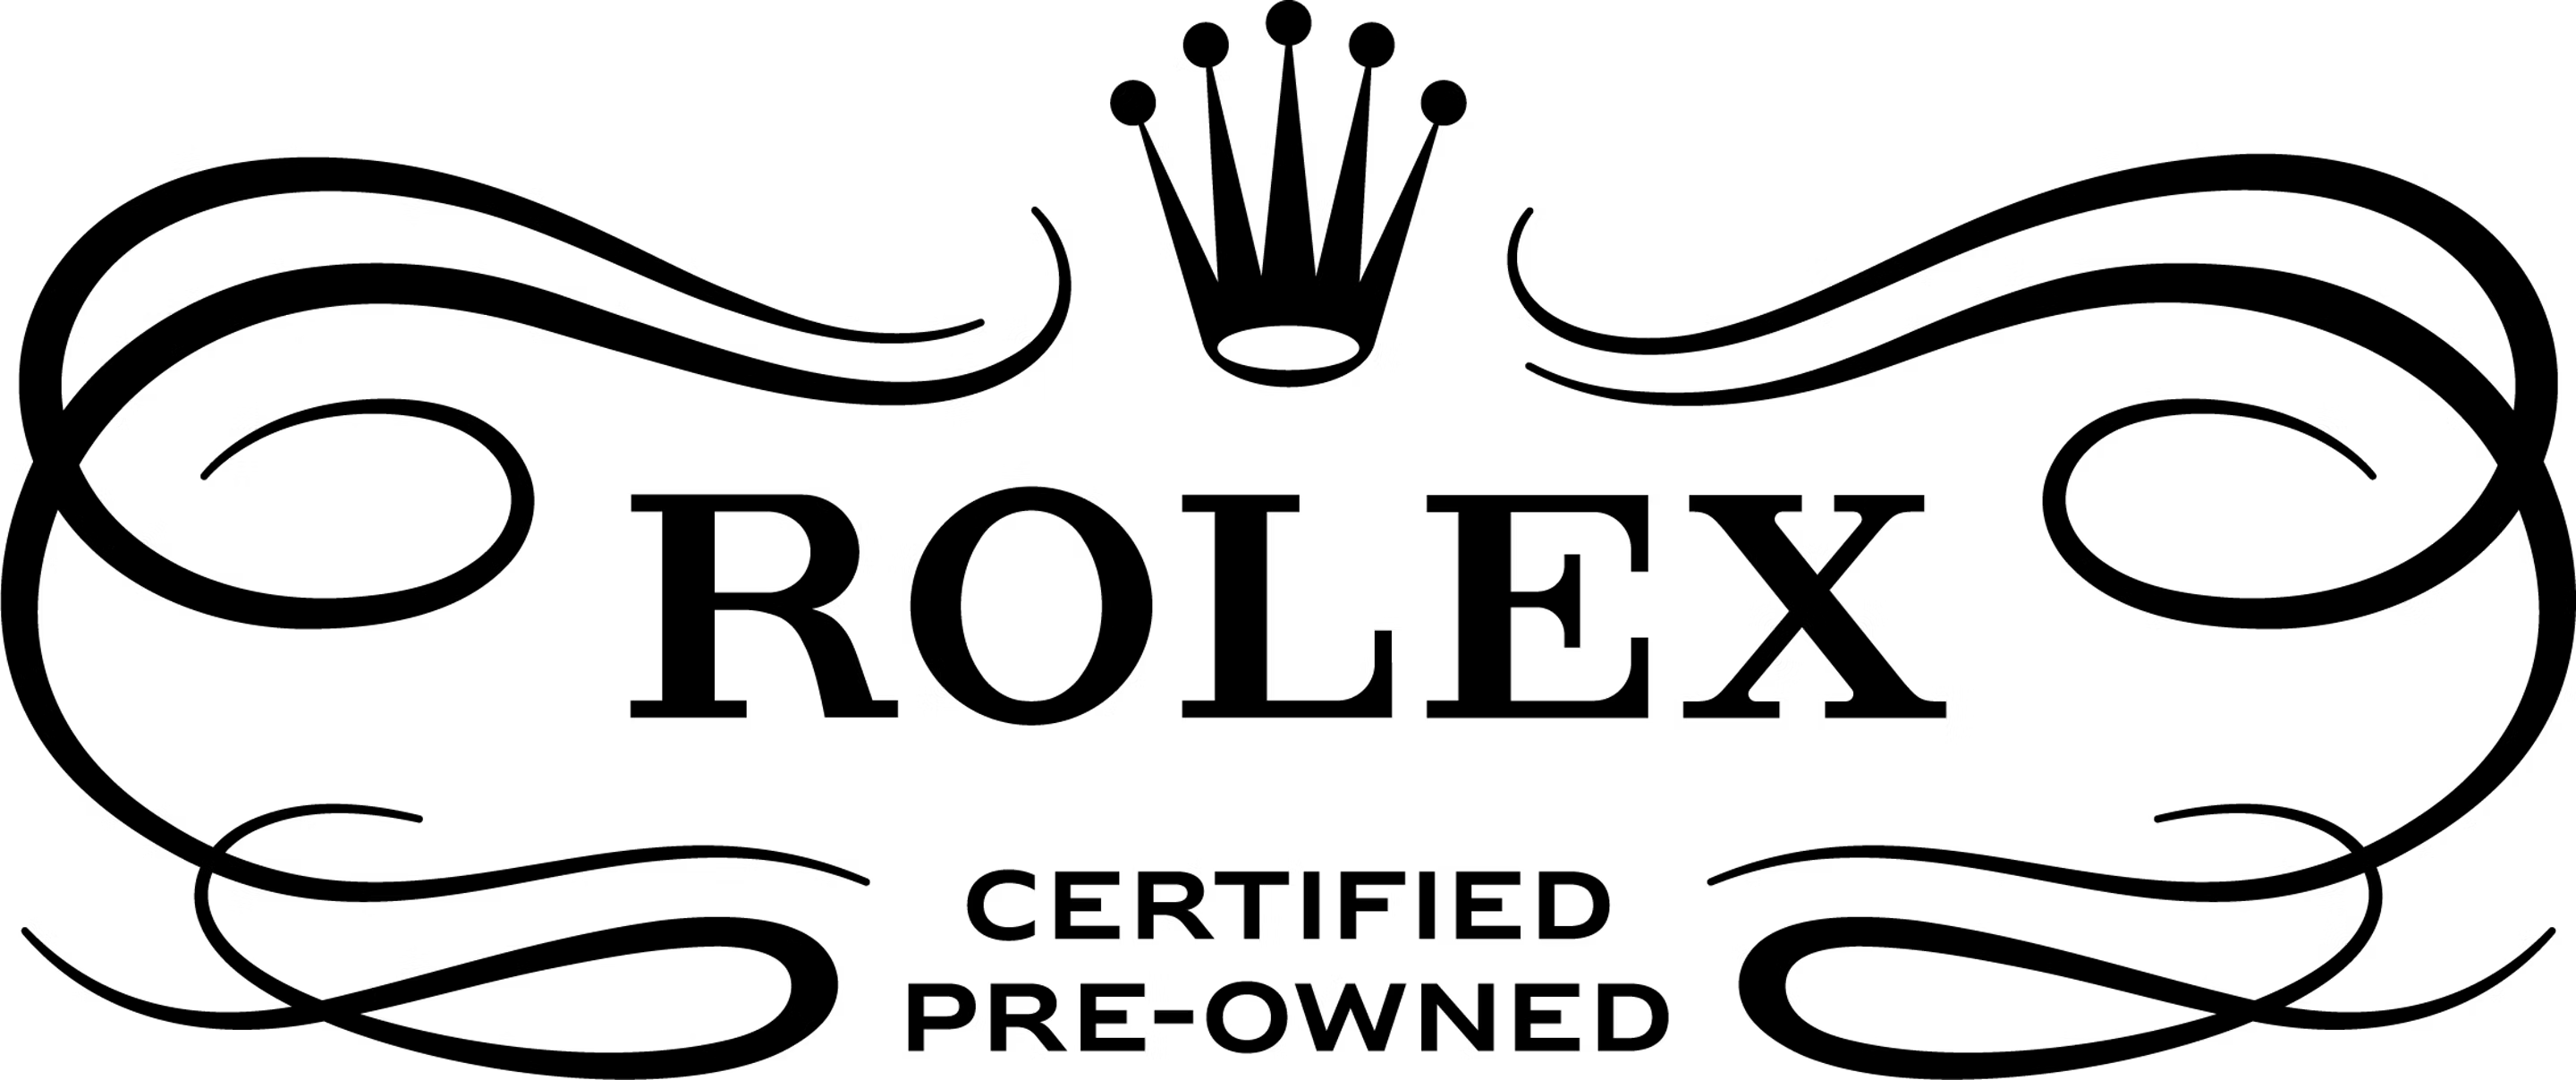 Rolex Official Jeweler Of Certified Pre-Owned Watches